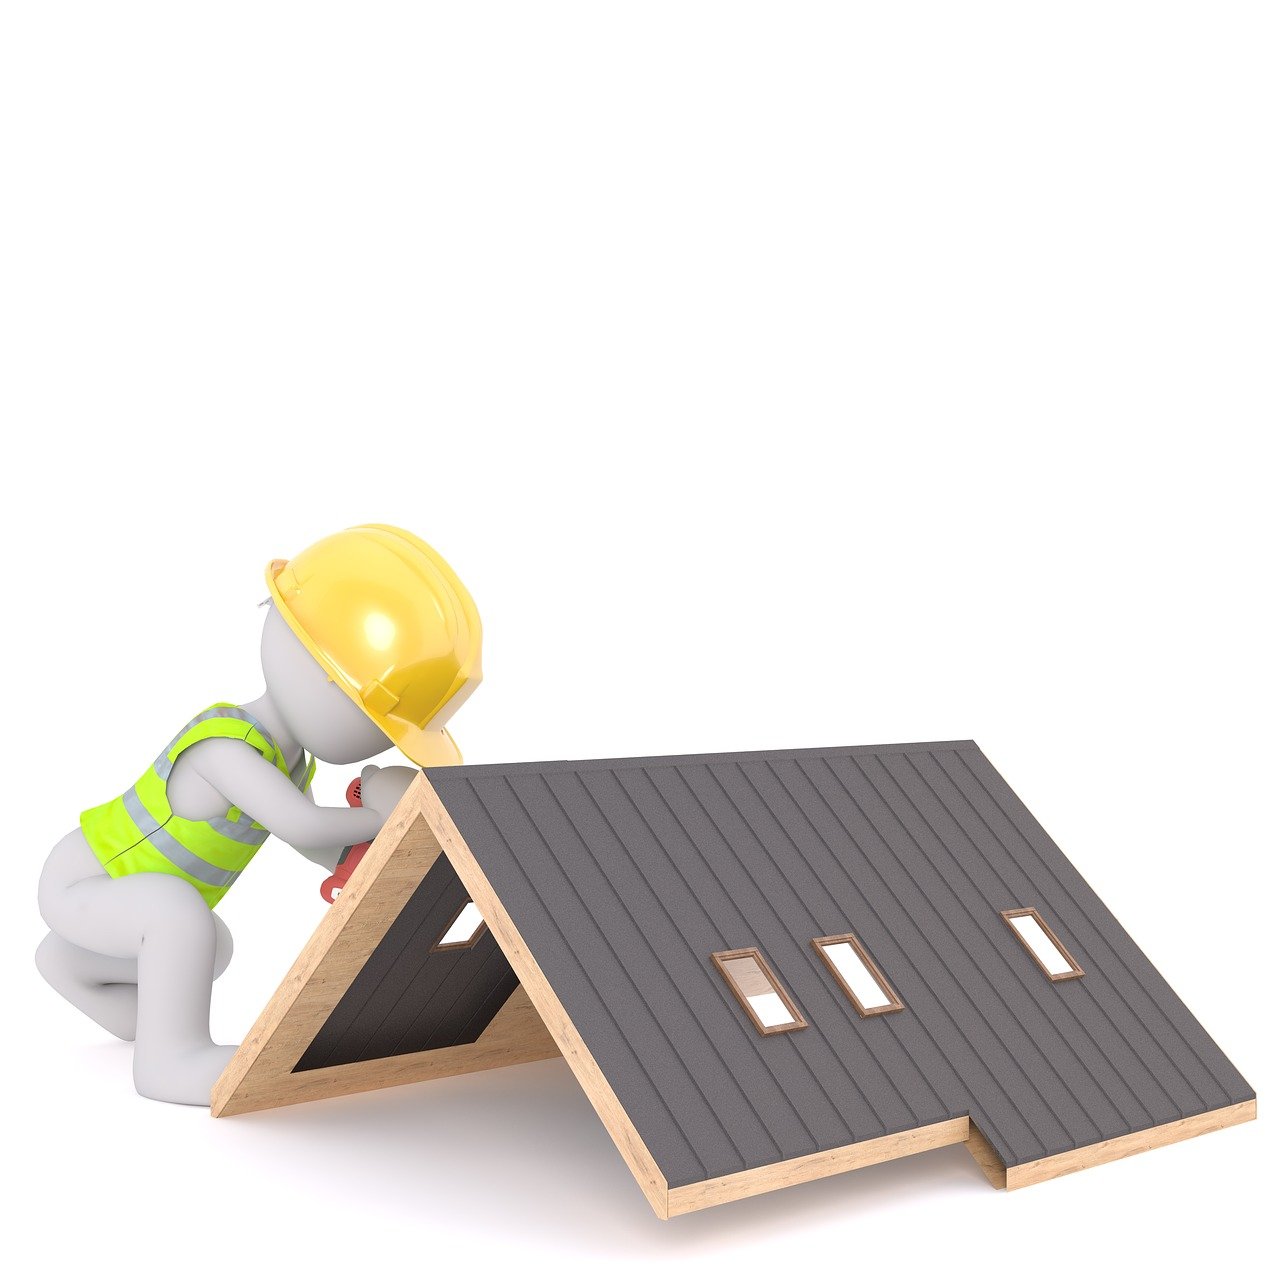 A Refresher on the Residential Roofing Bill